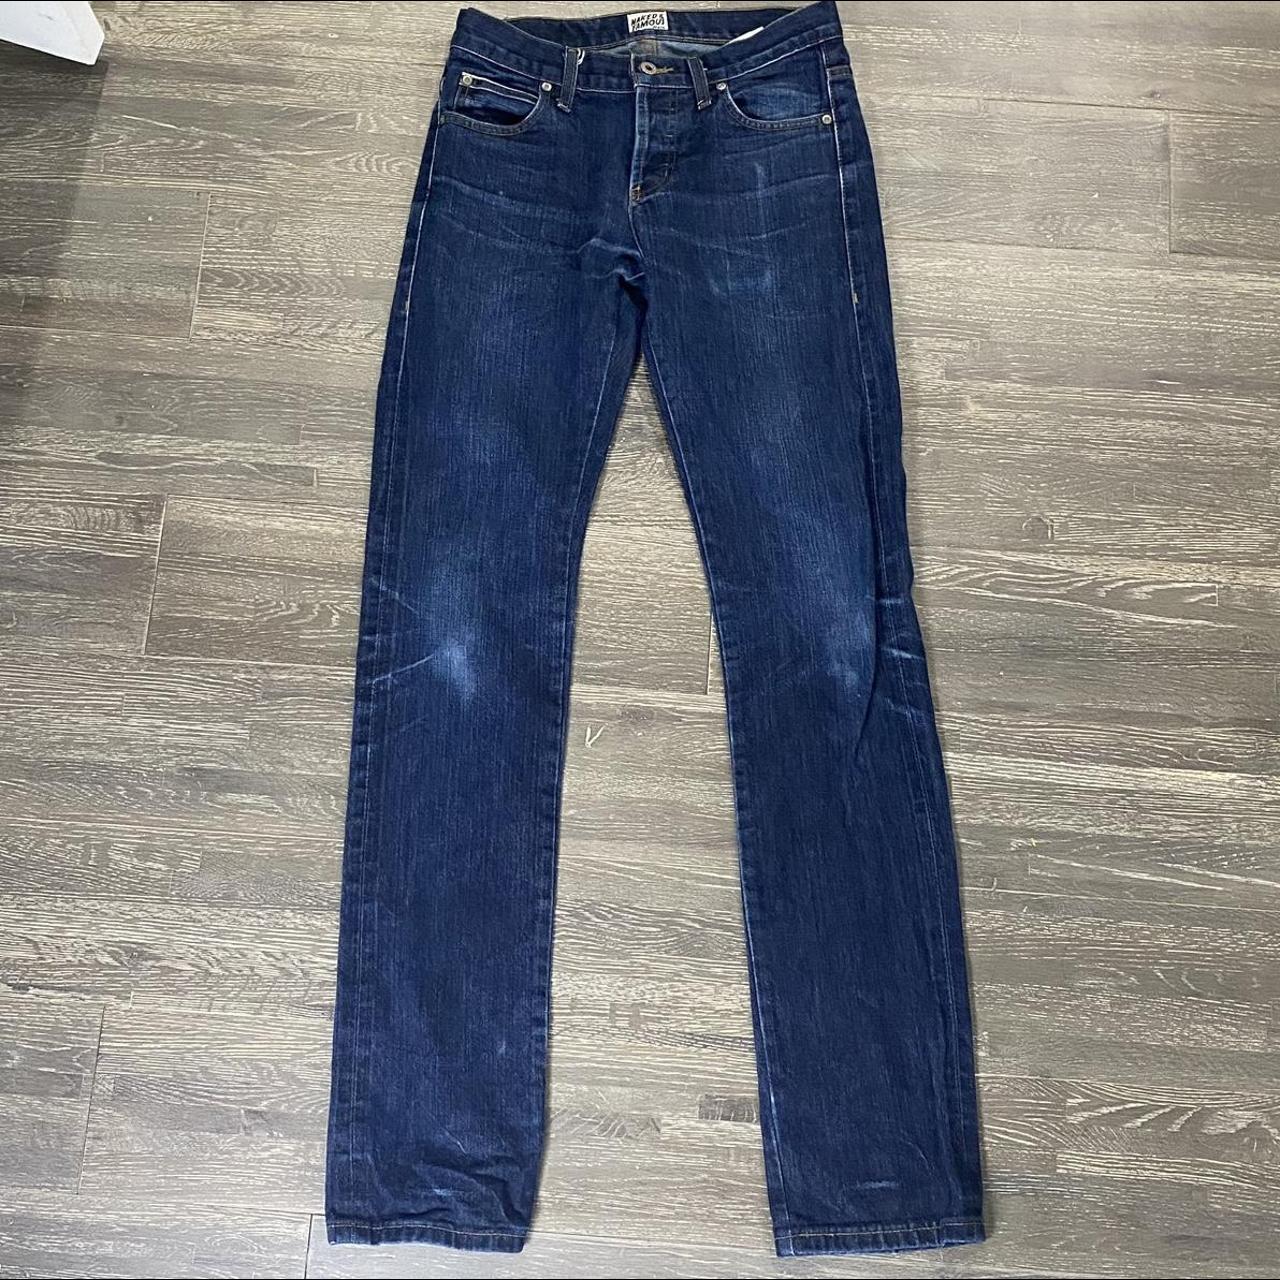 Naked & Famous Denim Women's Blue and Navy Jeans | Depop